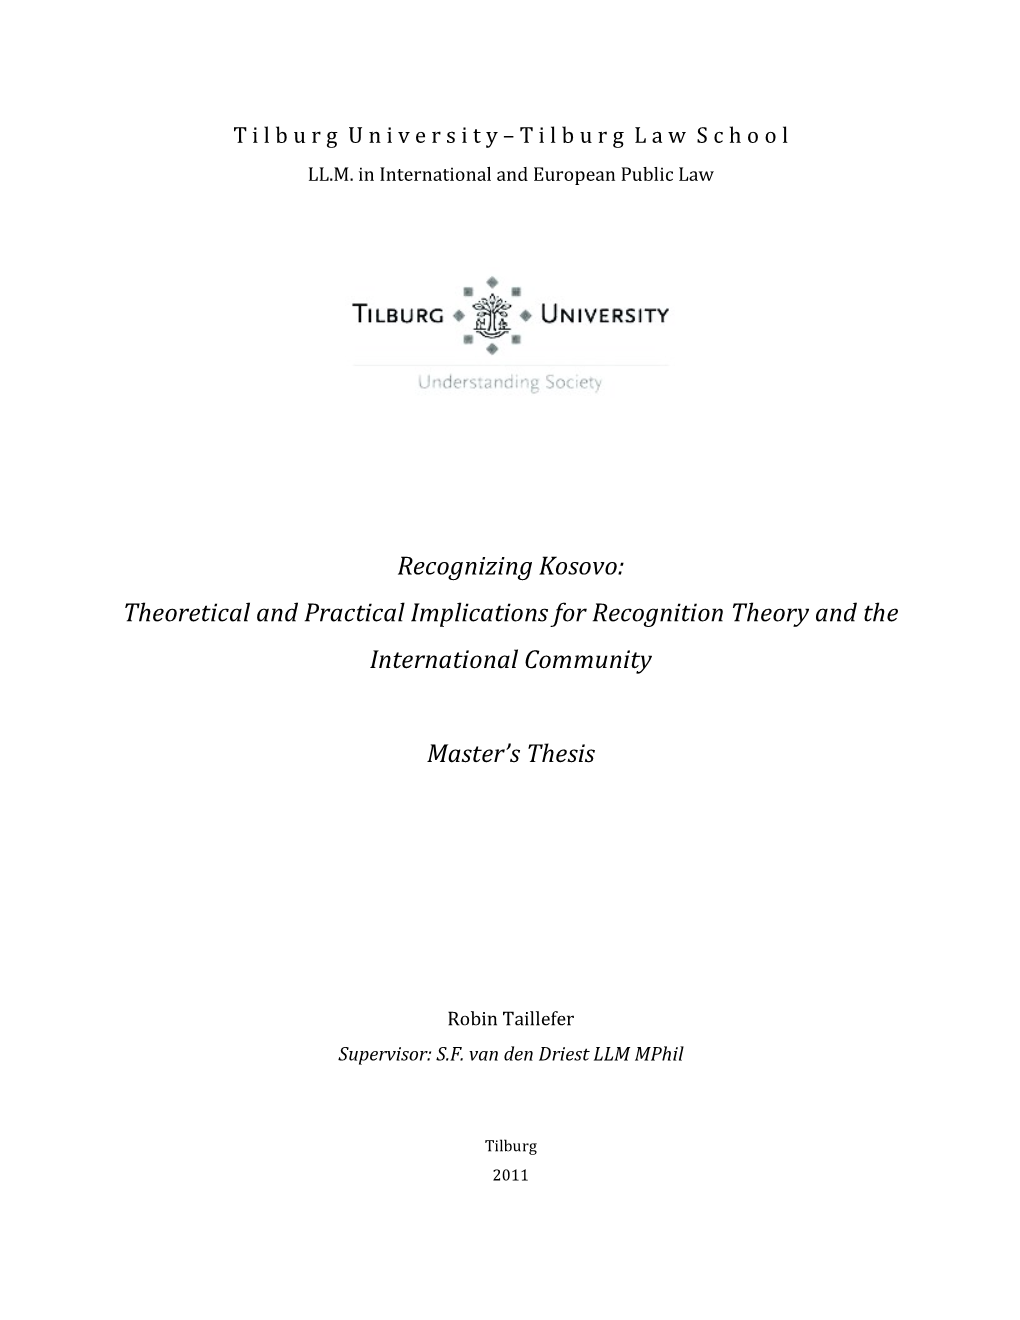 Recognizing Kosovo: Theoretical and Practical Implications for Recognition Theory and the International Community